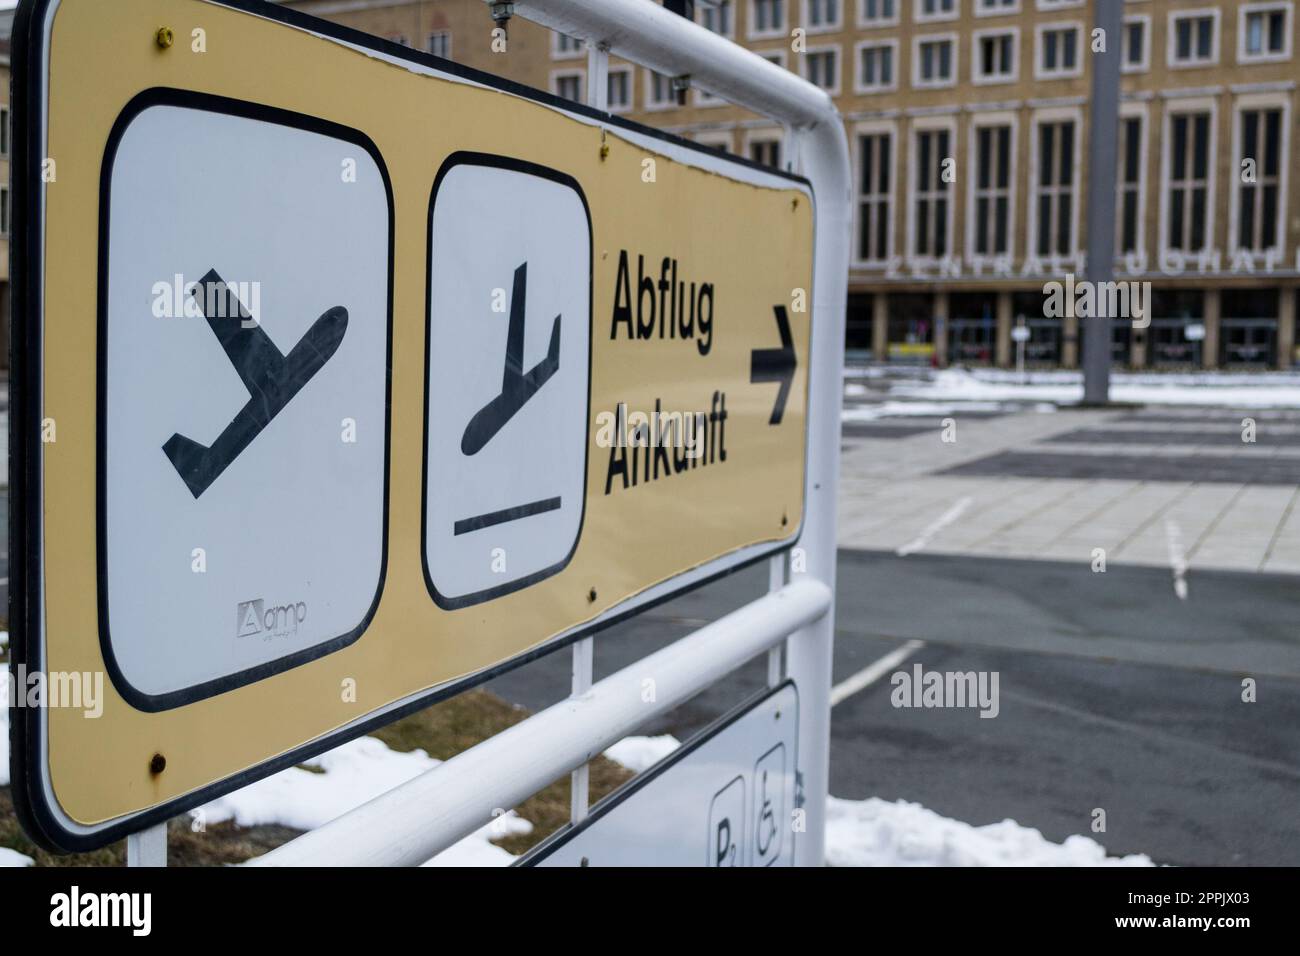 abflug ankunft, arrival departure directional sign outside of an airport Stock Photo